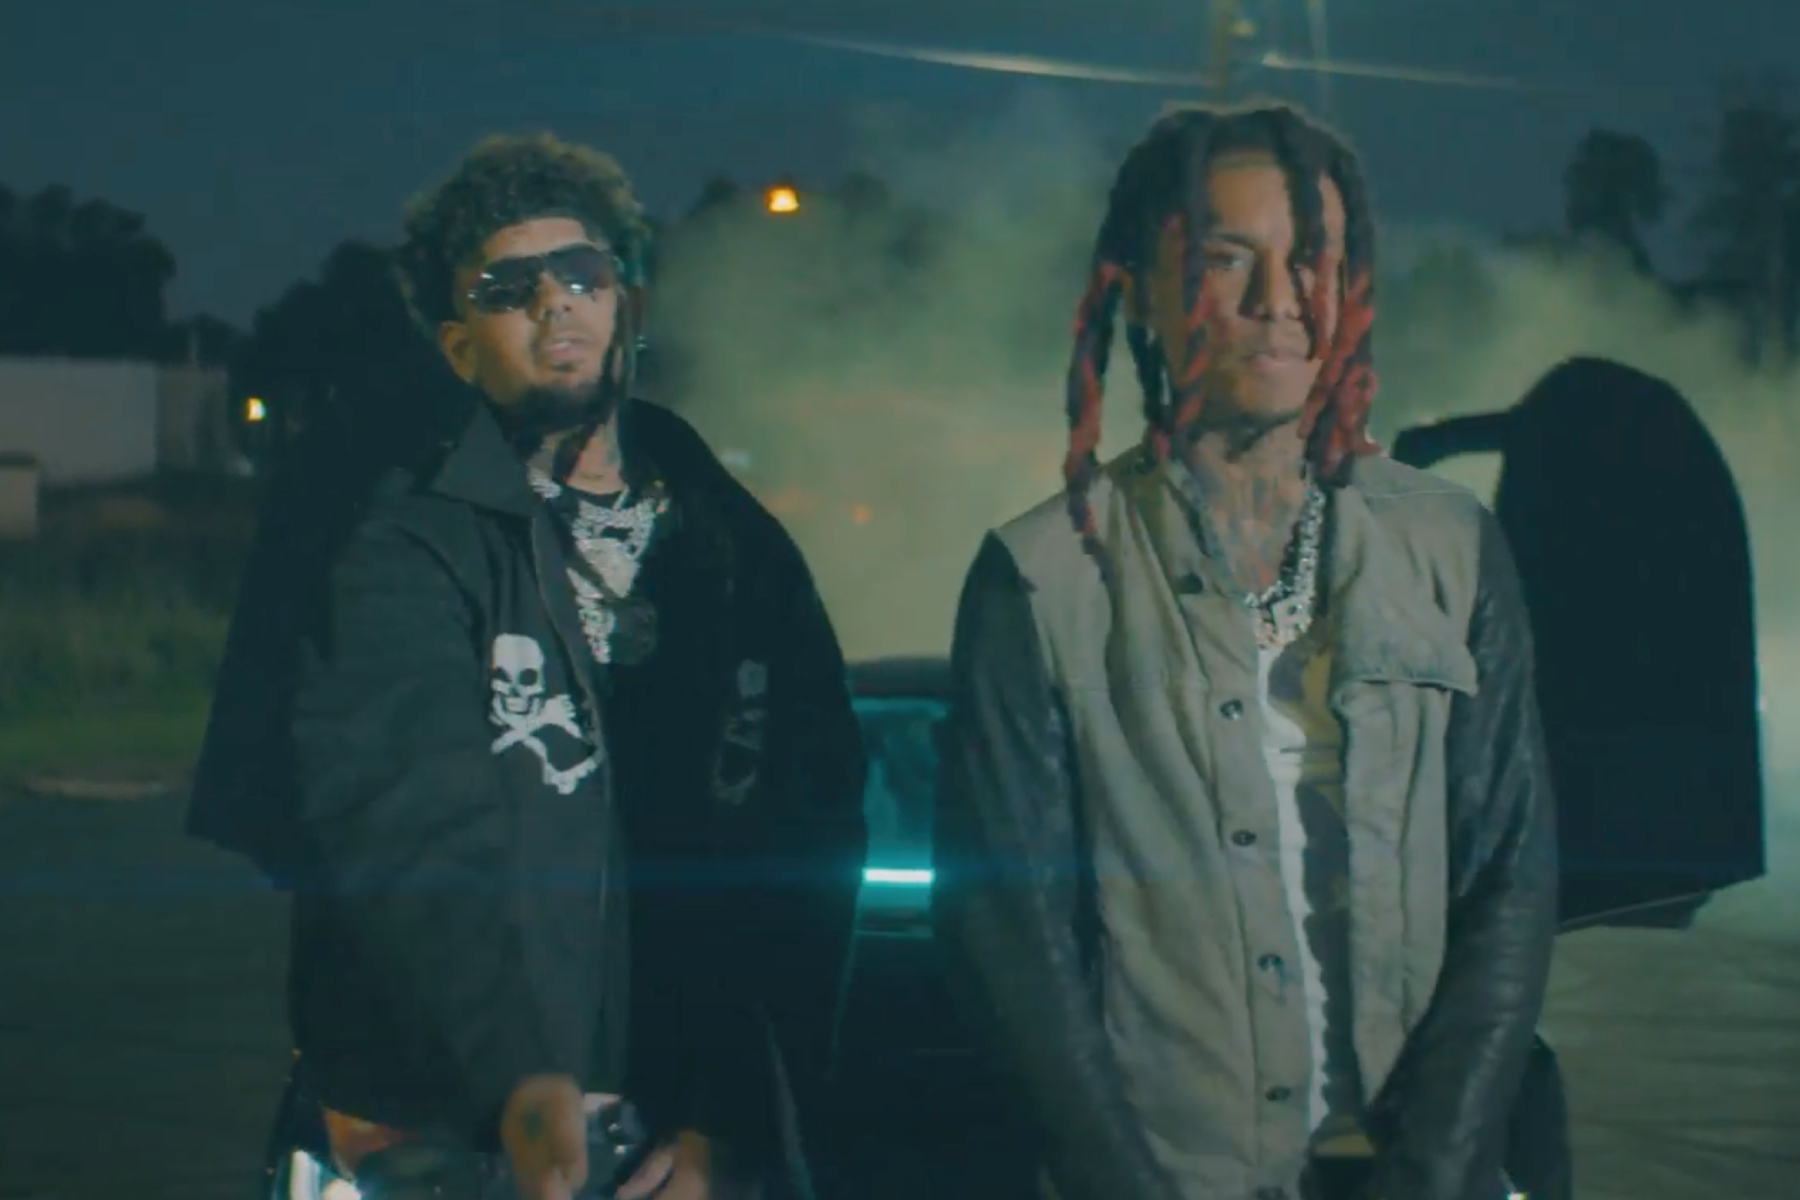 Smokepurpp and Lil Gnar team up in a new video titled “Not Your Speed”